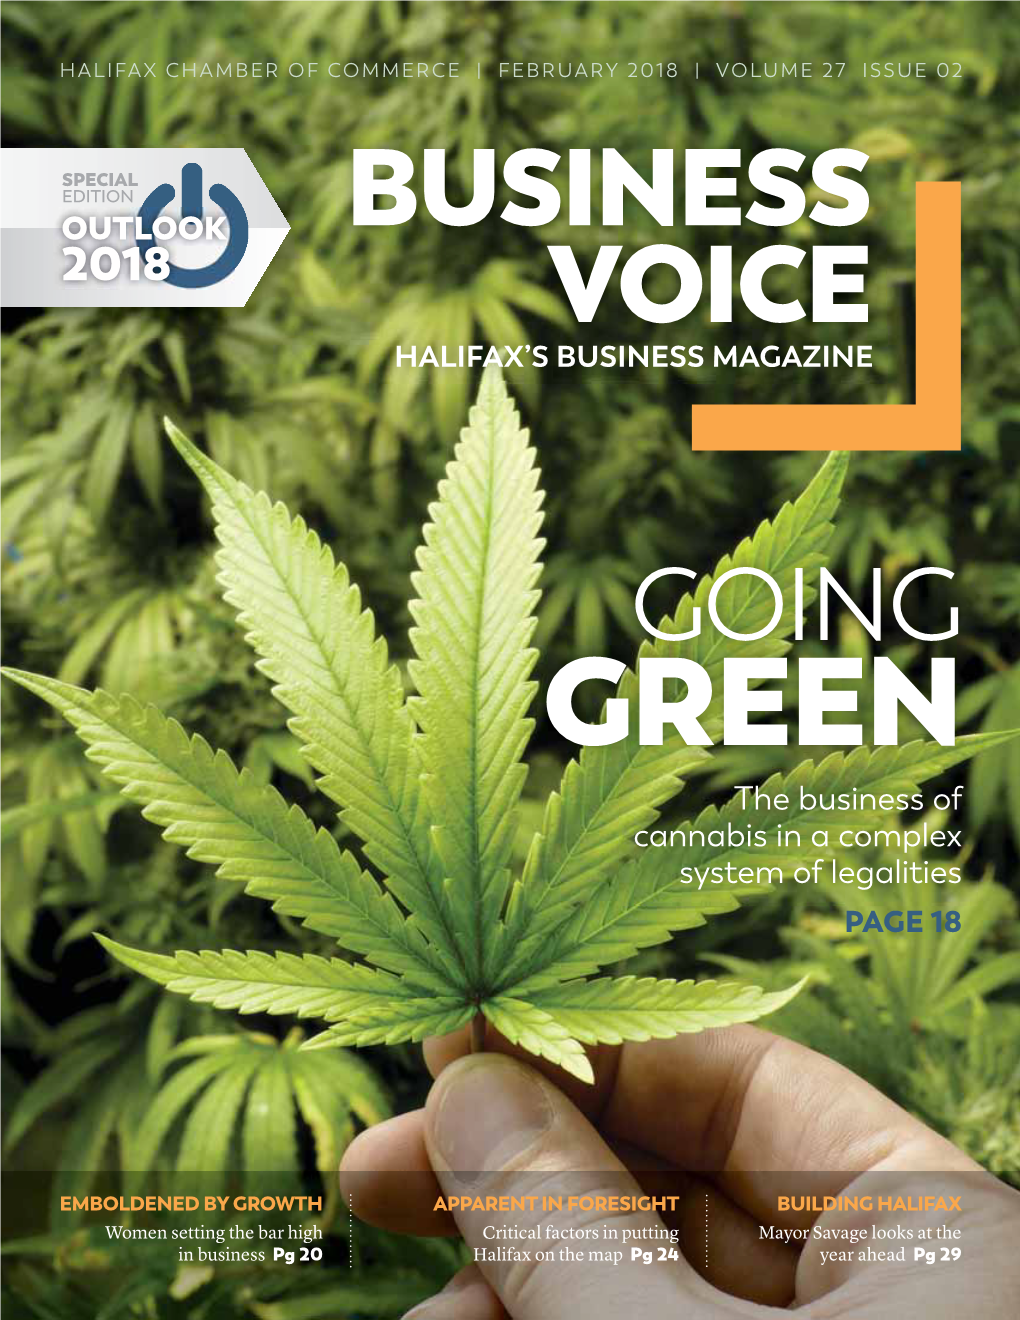 The Business of Cannabis in a Complex System of Legalities PAGE 18